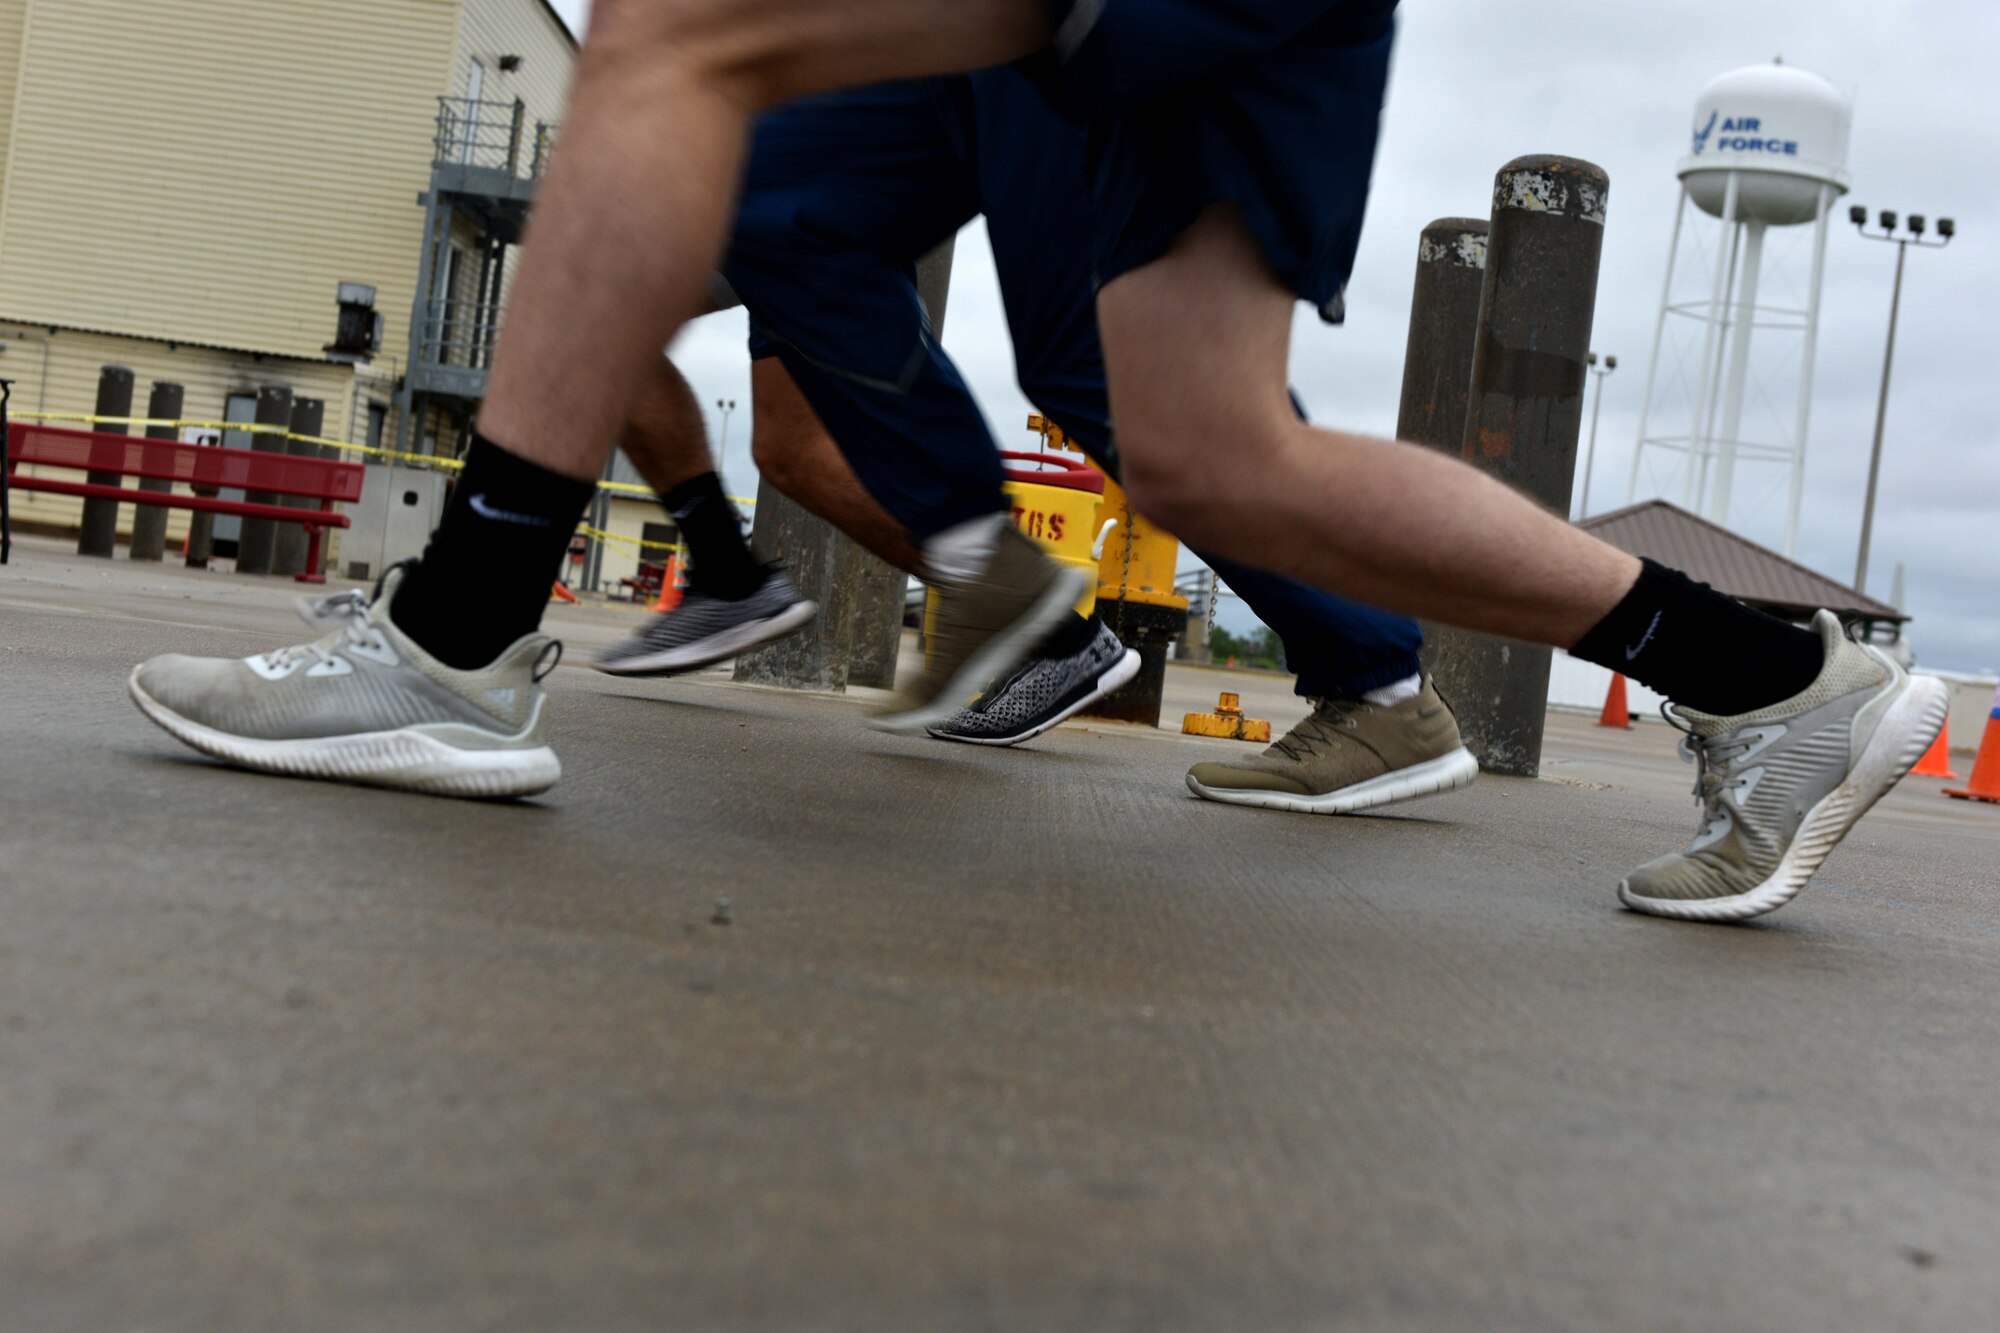 Airman Haden Stoner, Airman 1st Class Garrett Rivett and Airman Jake Peterson, 312th Training Squadron students, perform lunges during the Blood, Sweat and Stairs competition at the Louis F. Garland Department of Defense Fire Academy on Goodfellow Air Force Base, Texas, Sept. 22, 2018. Traditionally, participants would climb stairs to pay tribute to the first responders who died during 9/11. (U.S. Air Force photo by Senior Airman Randall Moose/Released)